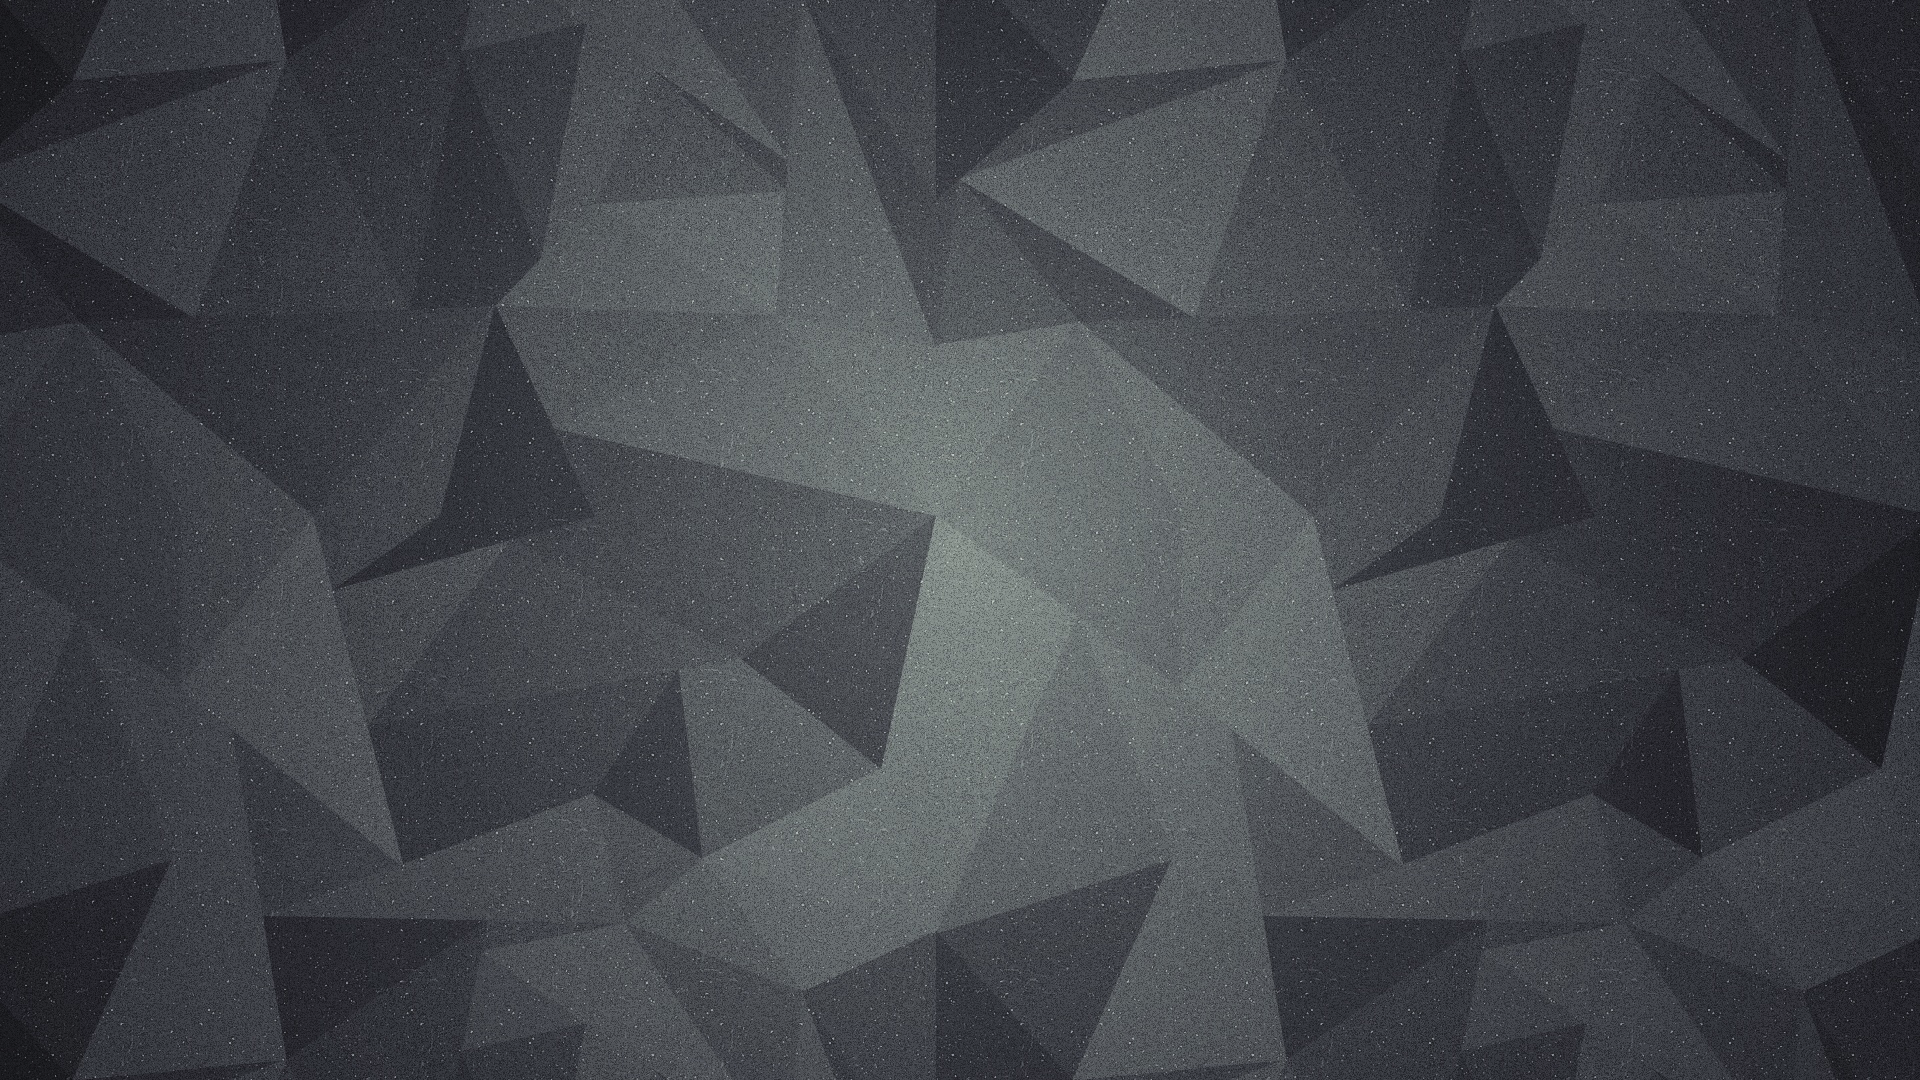 Abstract Geometric Shapes Desktop Pc And Mac Wallpaper